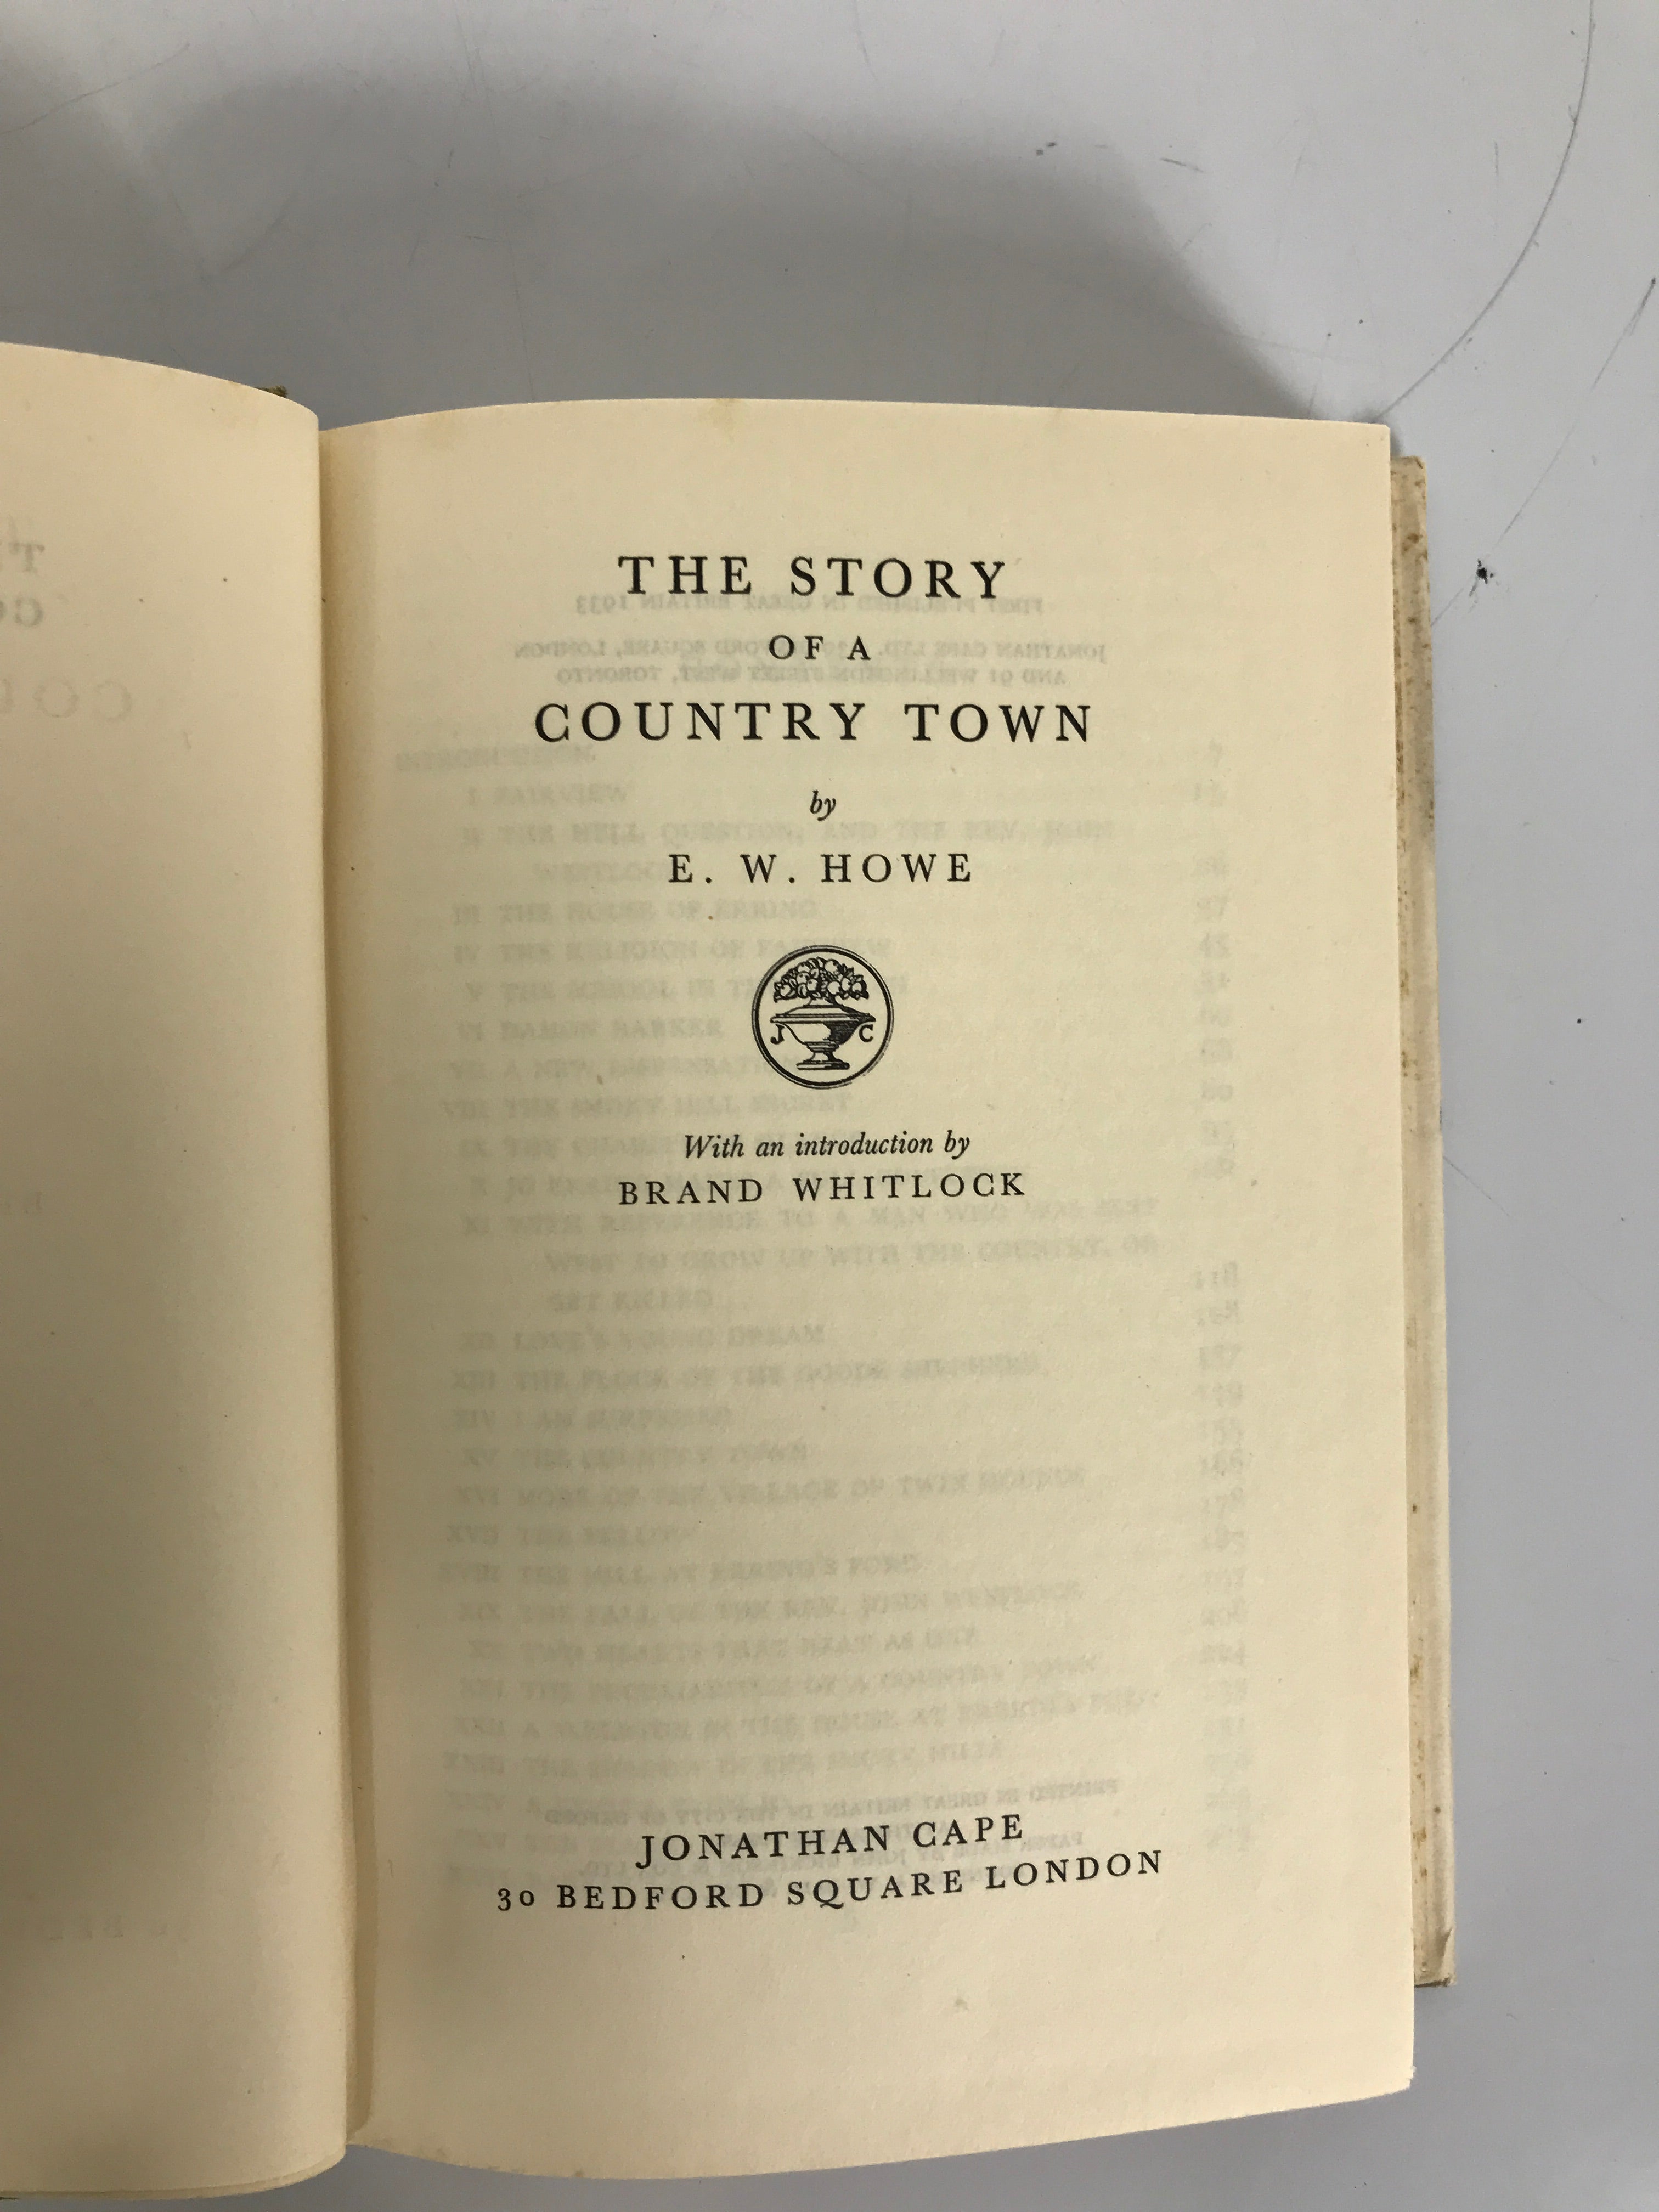 The Story of a Country Town by E.W. Howe 1933 HC DJ